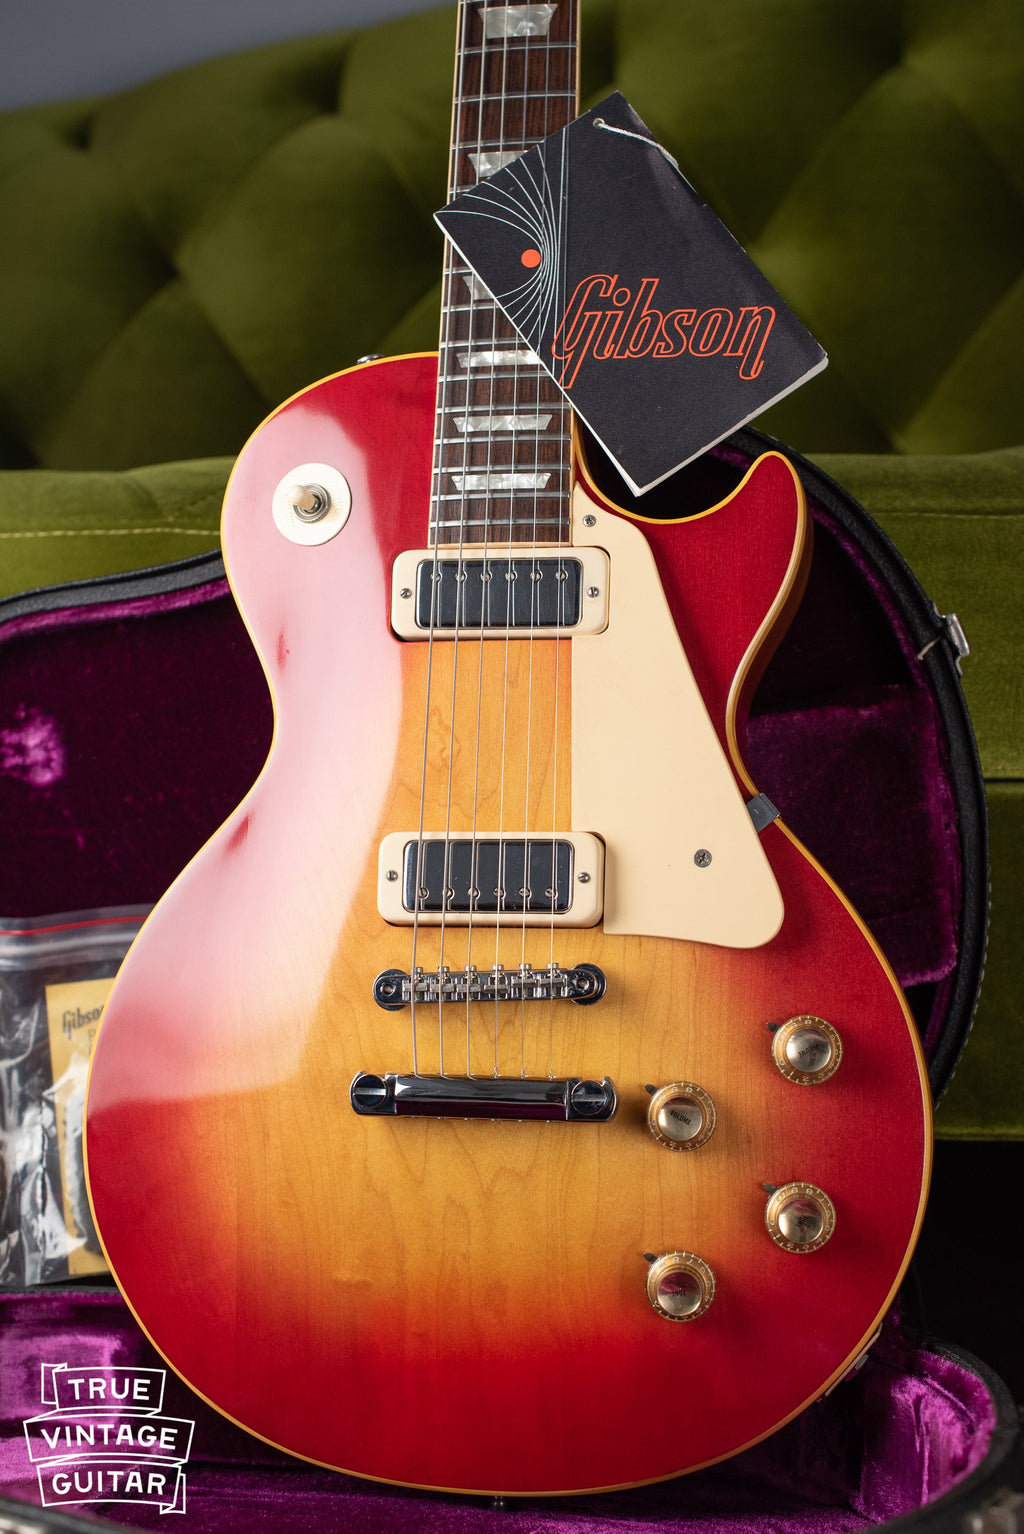 1970 Gibson Les Paul Deluxe with hang tag